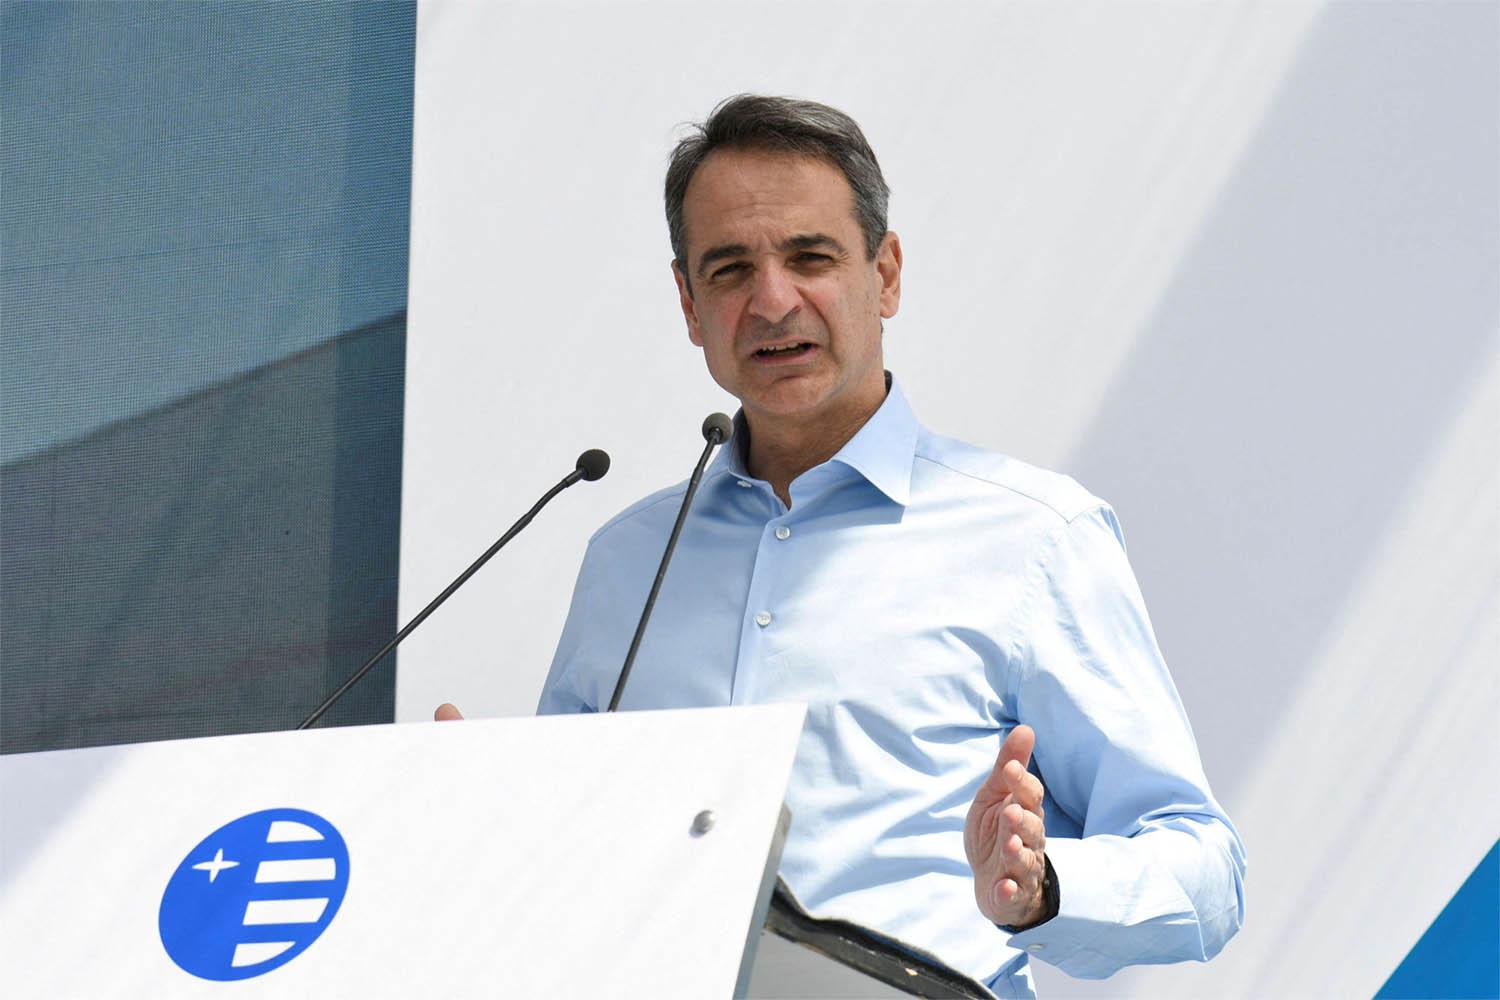 Mitsotakis said there was room for further cooperation between the EU and the UAE on renewable energy